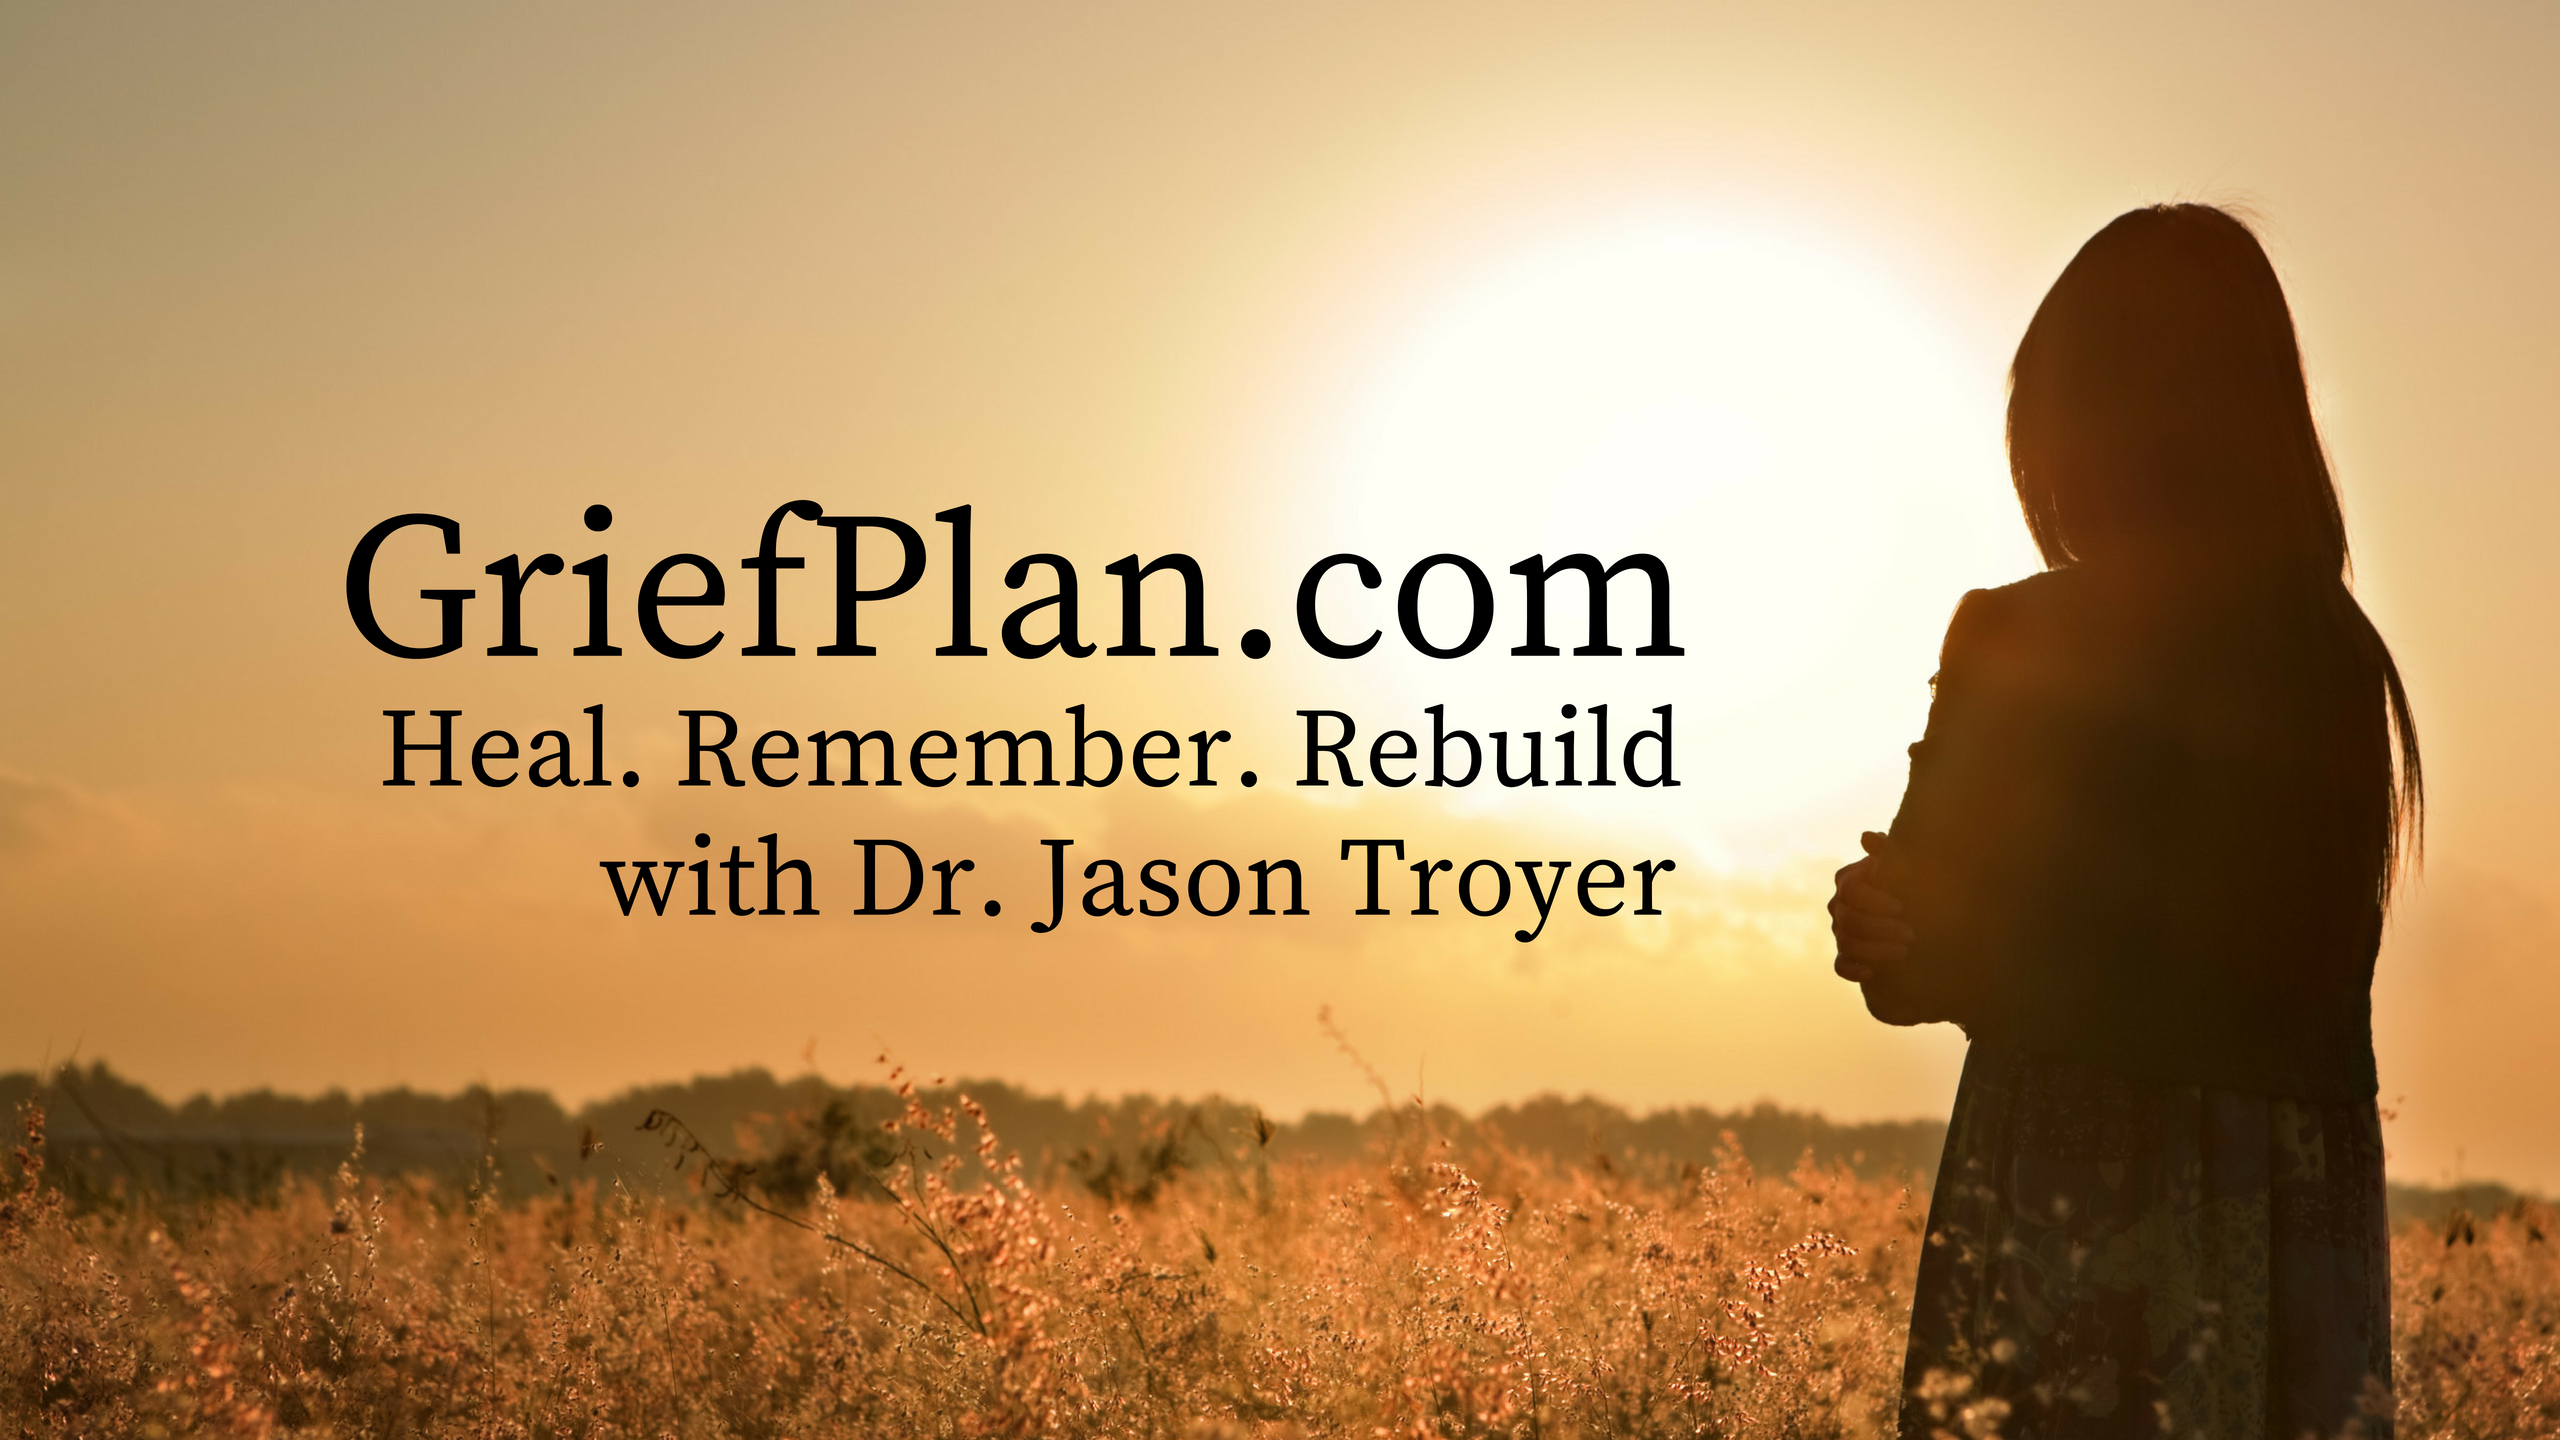 griefplan.com Heal remember rebuild with Dr. Jason Troyer. Text overlayed on a picture of a woman standing in a field of high grass looking at the sunset.